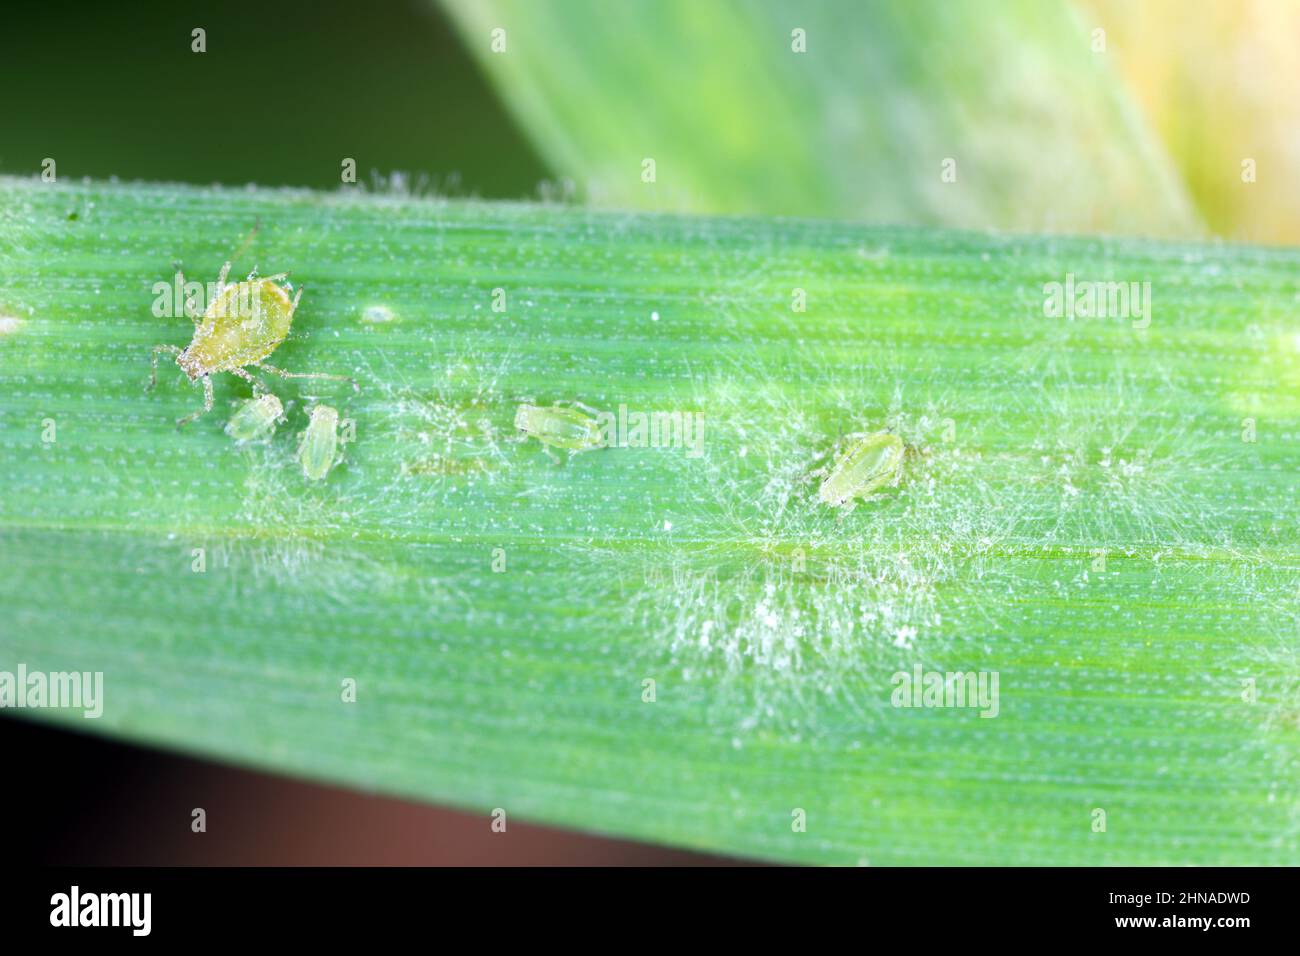 Peach aphid and powdery mildew on barley foliage. Stock Photo